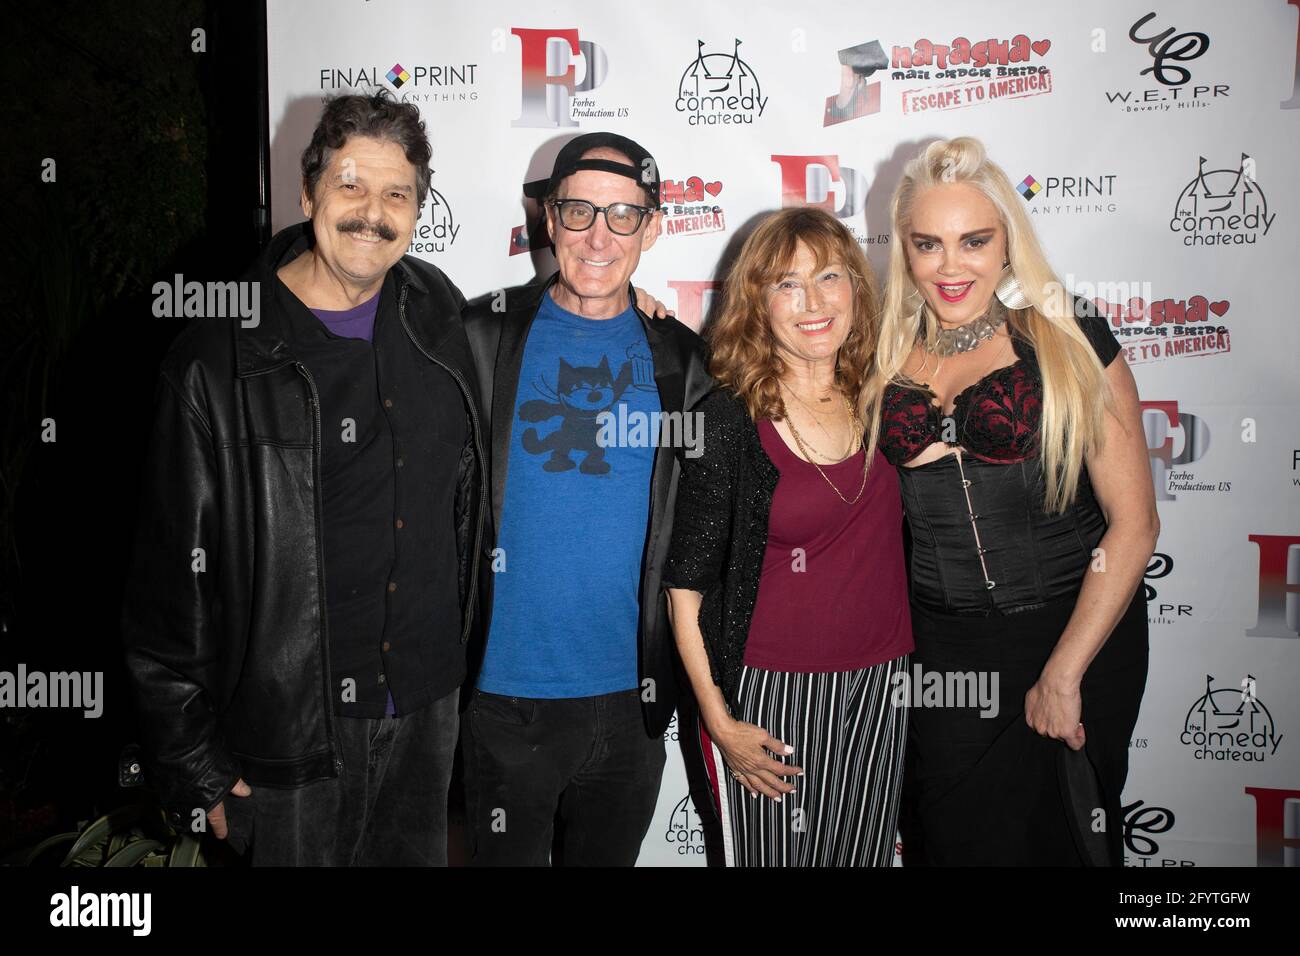 North Hollywood, Kalifornien, USA. Mai 2021. Rich Rossi, Felix McNulty, Mira Wilder, Brooke Forbes besuchen Forbes Productions Presents: The Stained Red Carpet at the Comedy Chateau, North Hollywood, CA on May 29, 2021 Credit: Eugene Powers/Alamy Live News Stockfoto